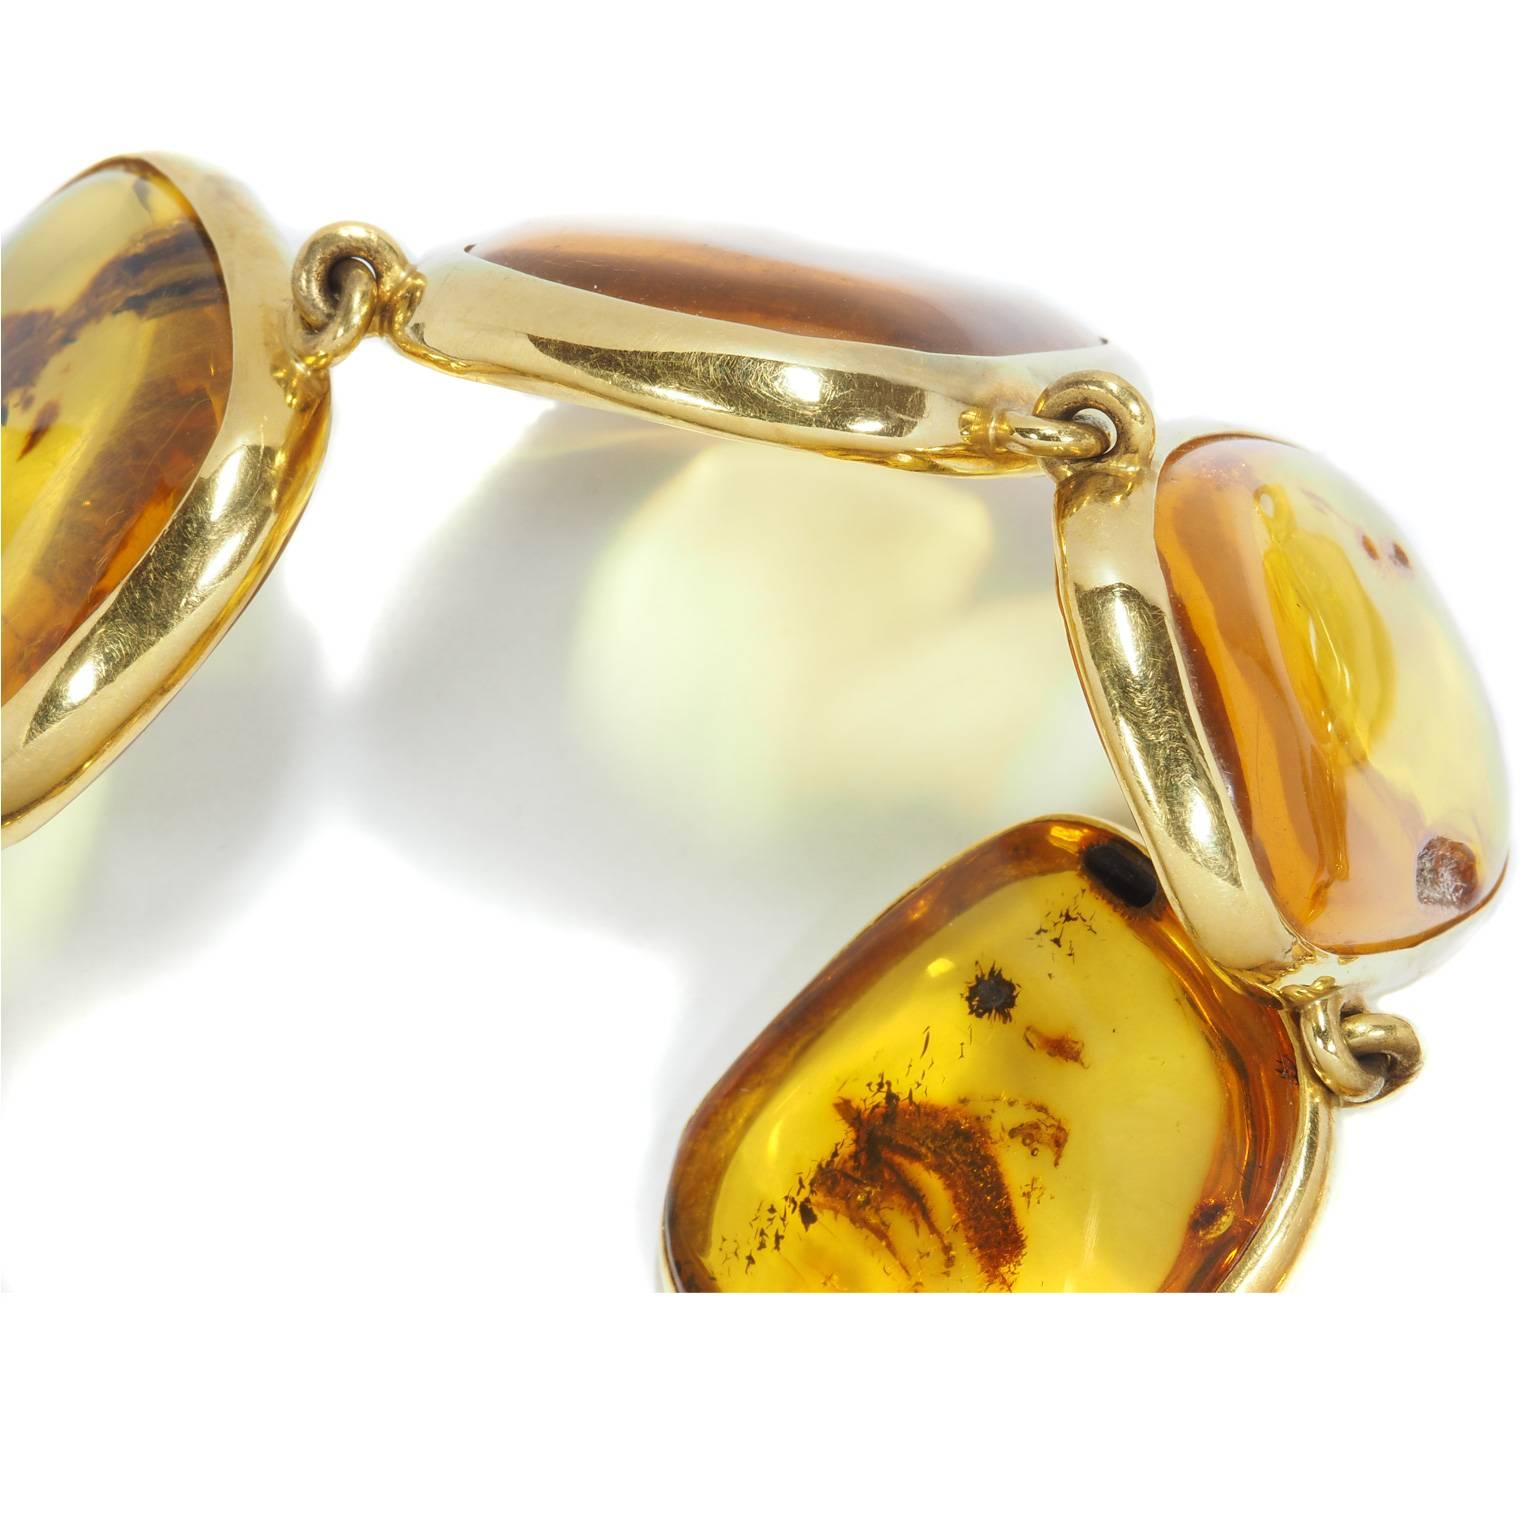 stunning and impressive handmade amber necklace in 22k yellow gold from the “one of a kind” collection by Colleen B. Rosenblat. This necklace is 55 cm long and between 4.5 cm and 5.6 cm wide.